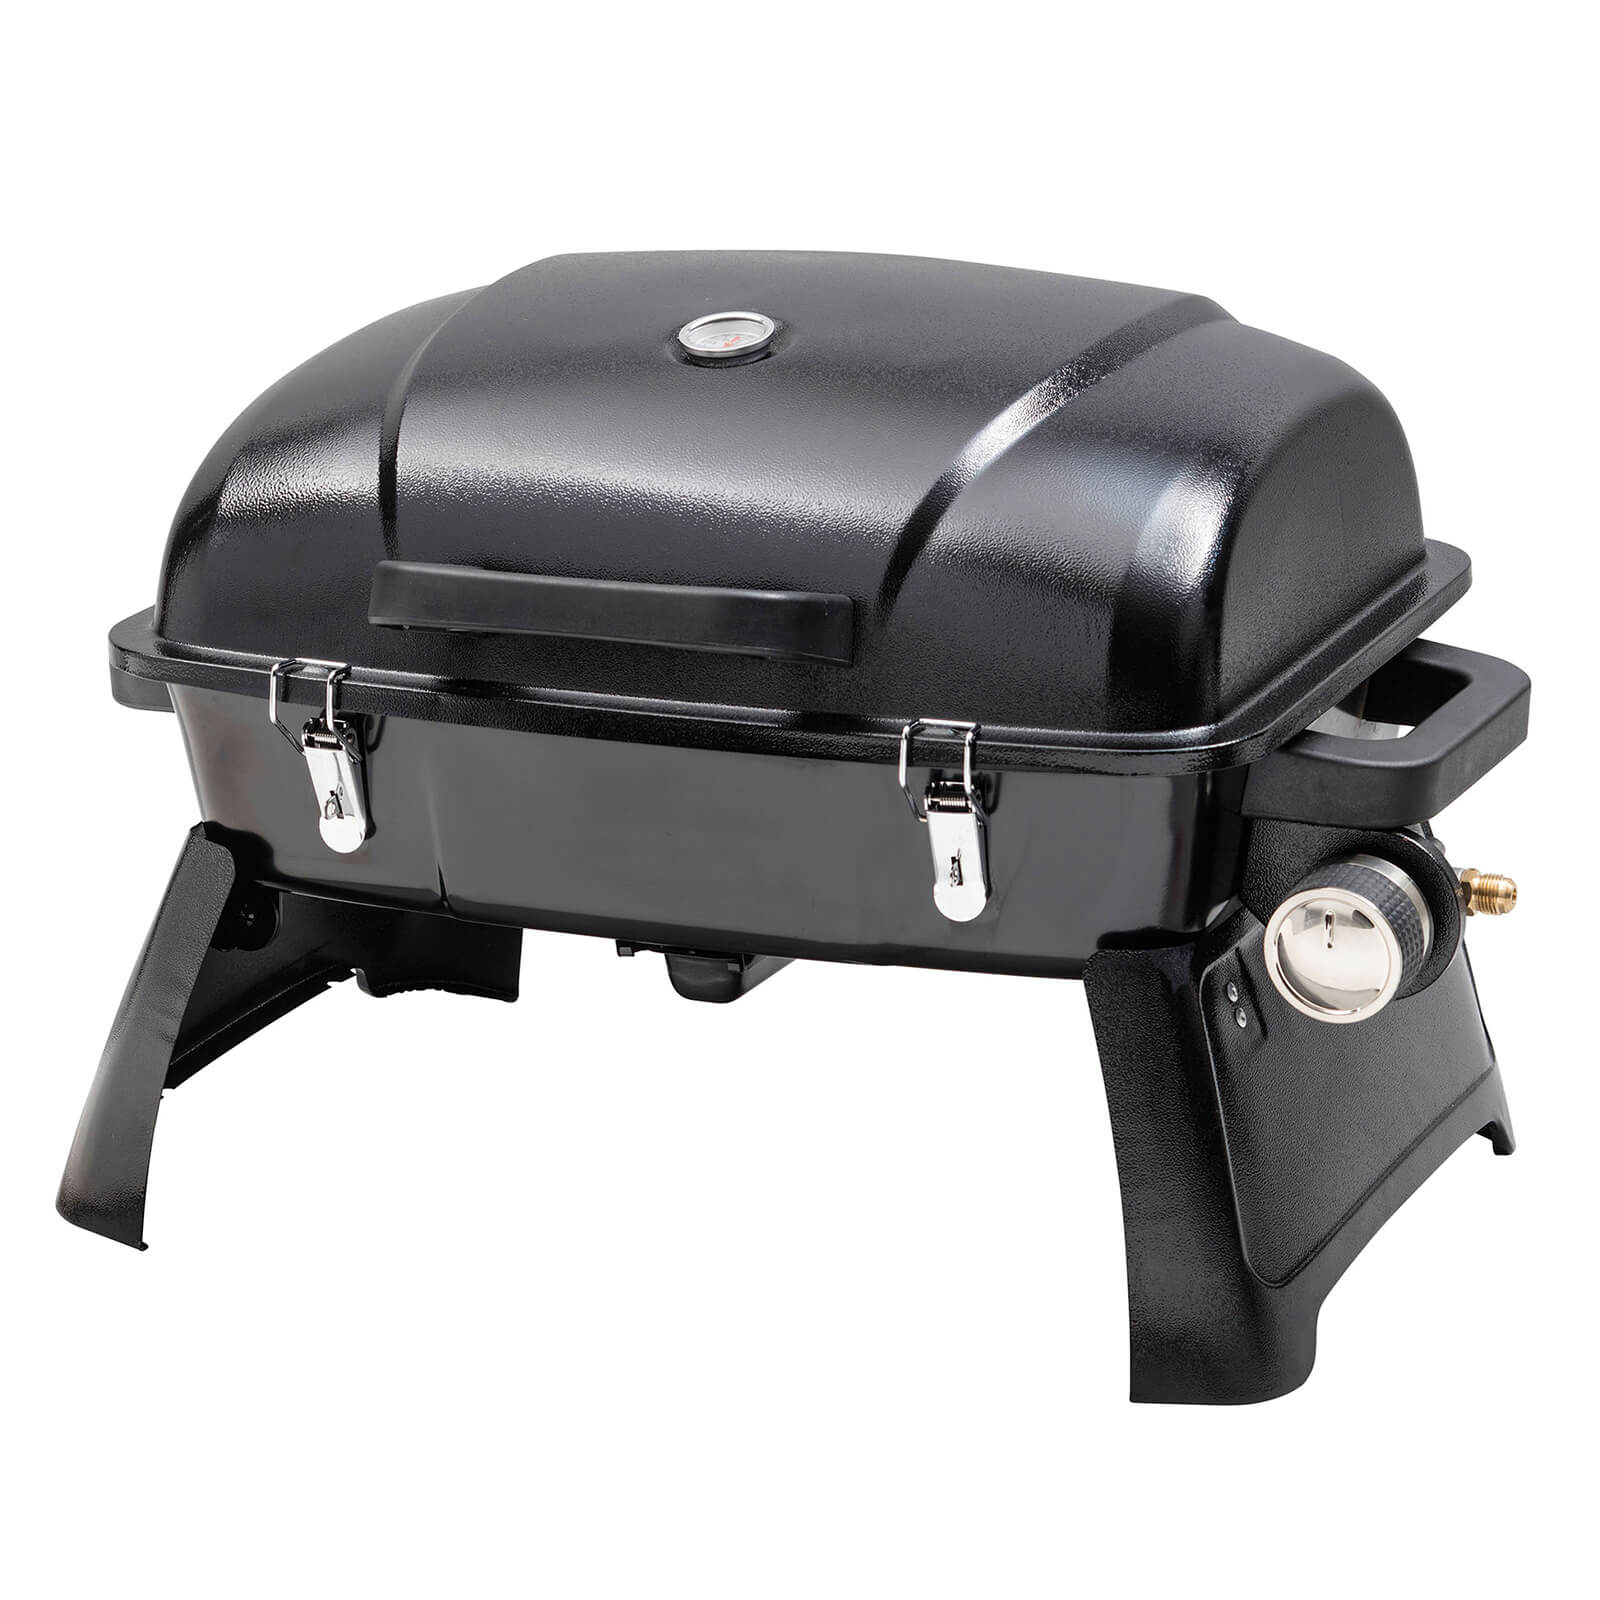 Gasmate Portable Gas Outdoor Grill BBQ